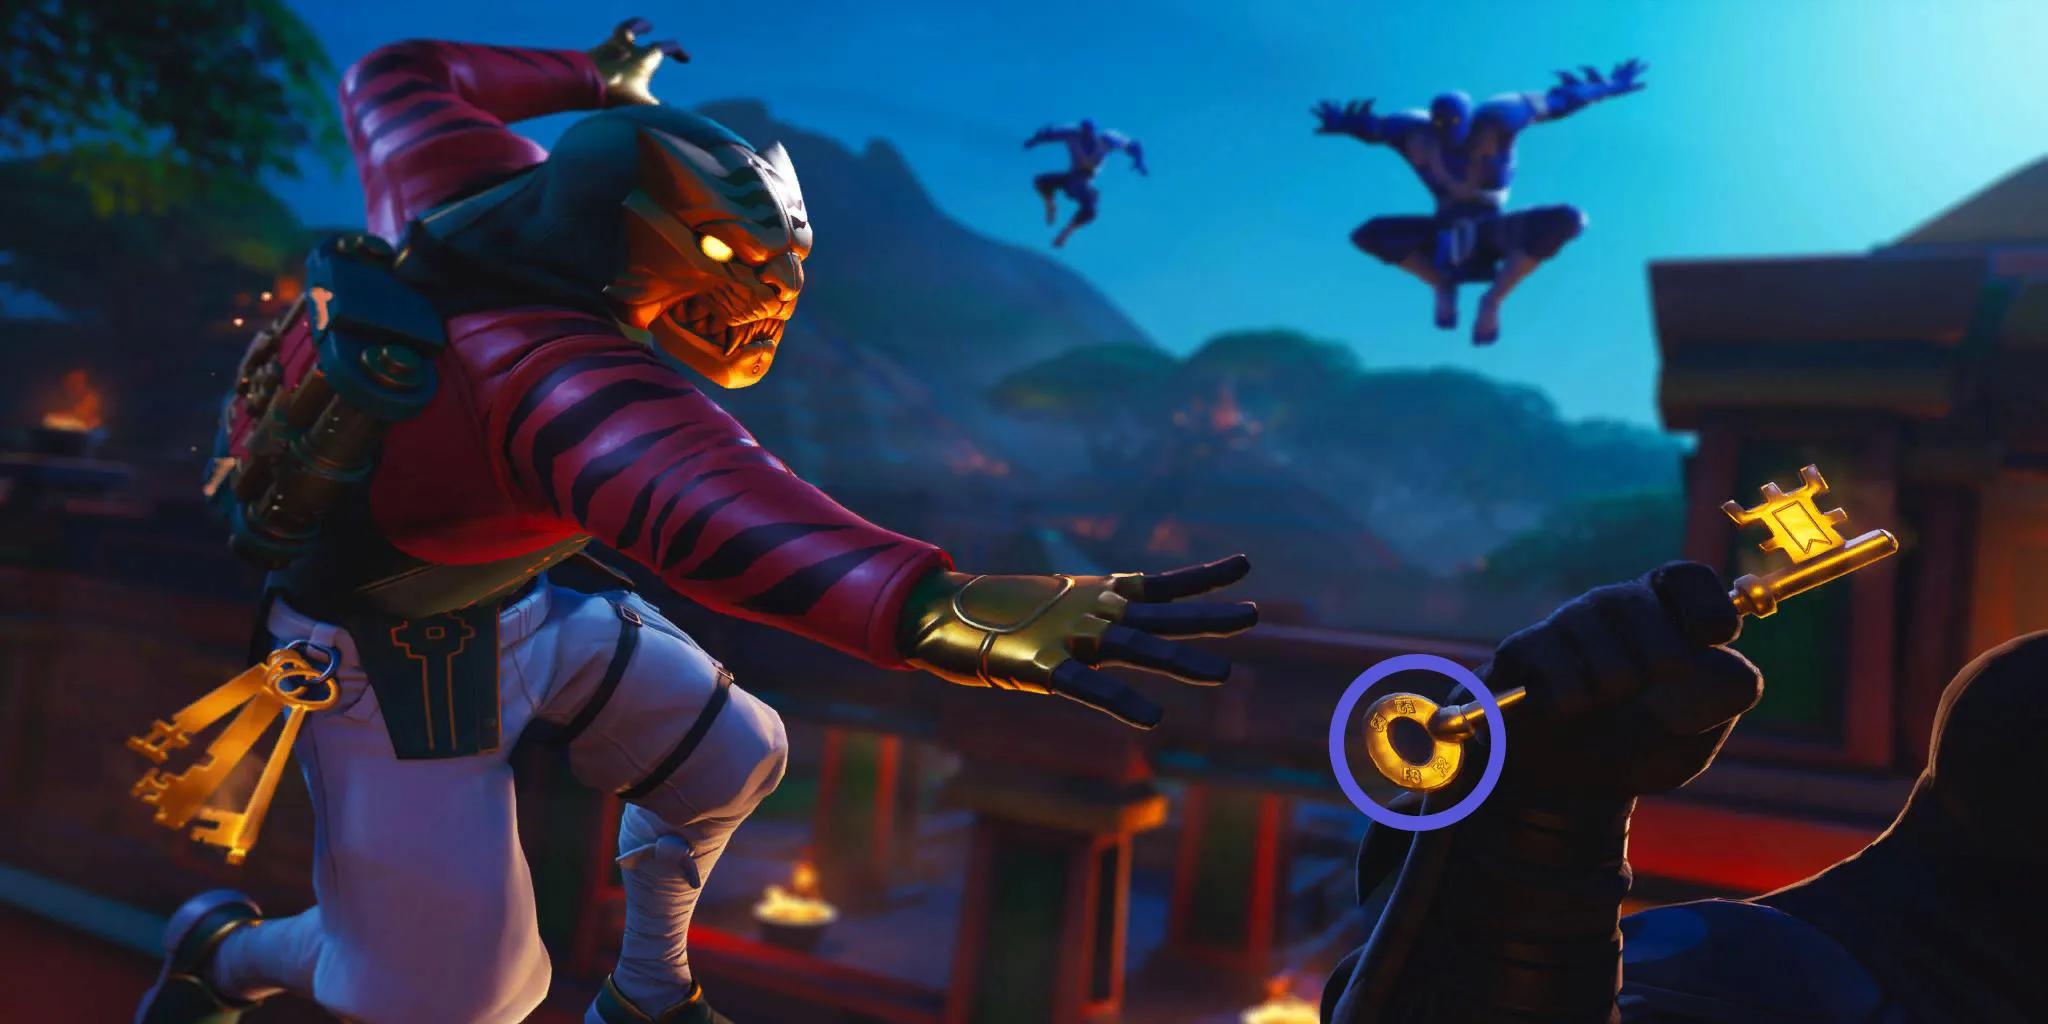 Fortnite Season 8 Secret Battle Stars Locations All Hidden Banners - if you are having trouble reading the key it shows the coordinates e2 e3 f2 f3 which will bring you to the following location on the map